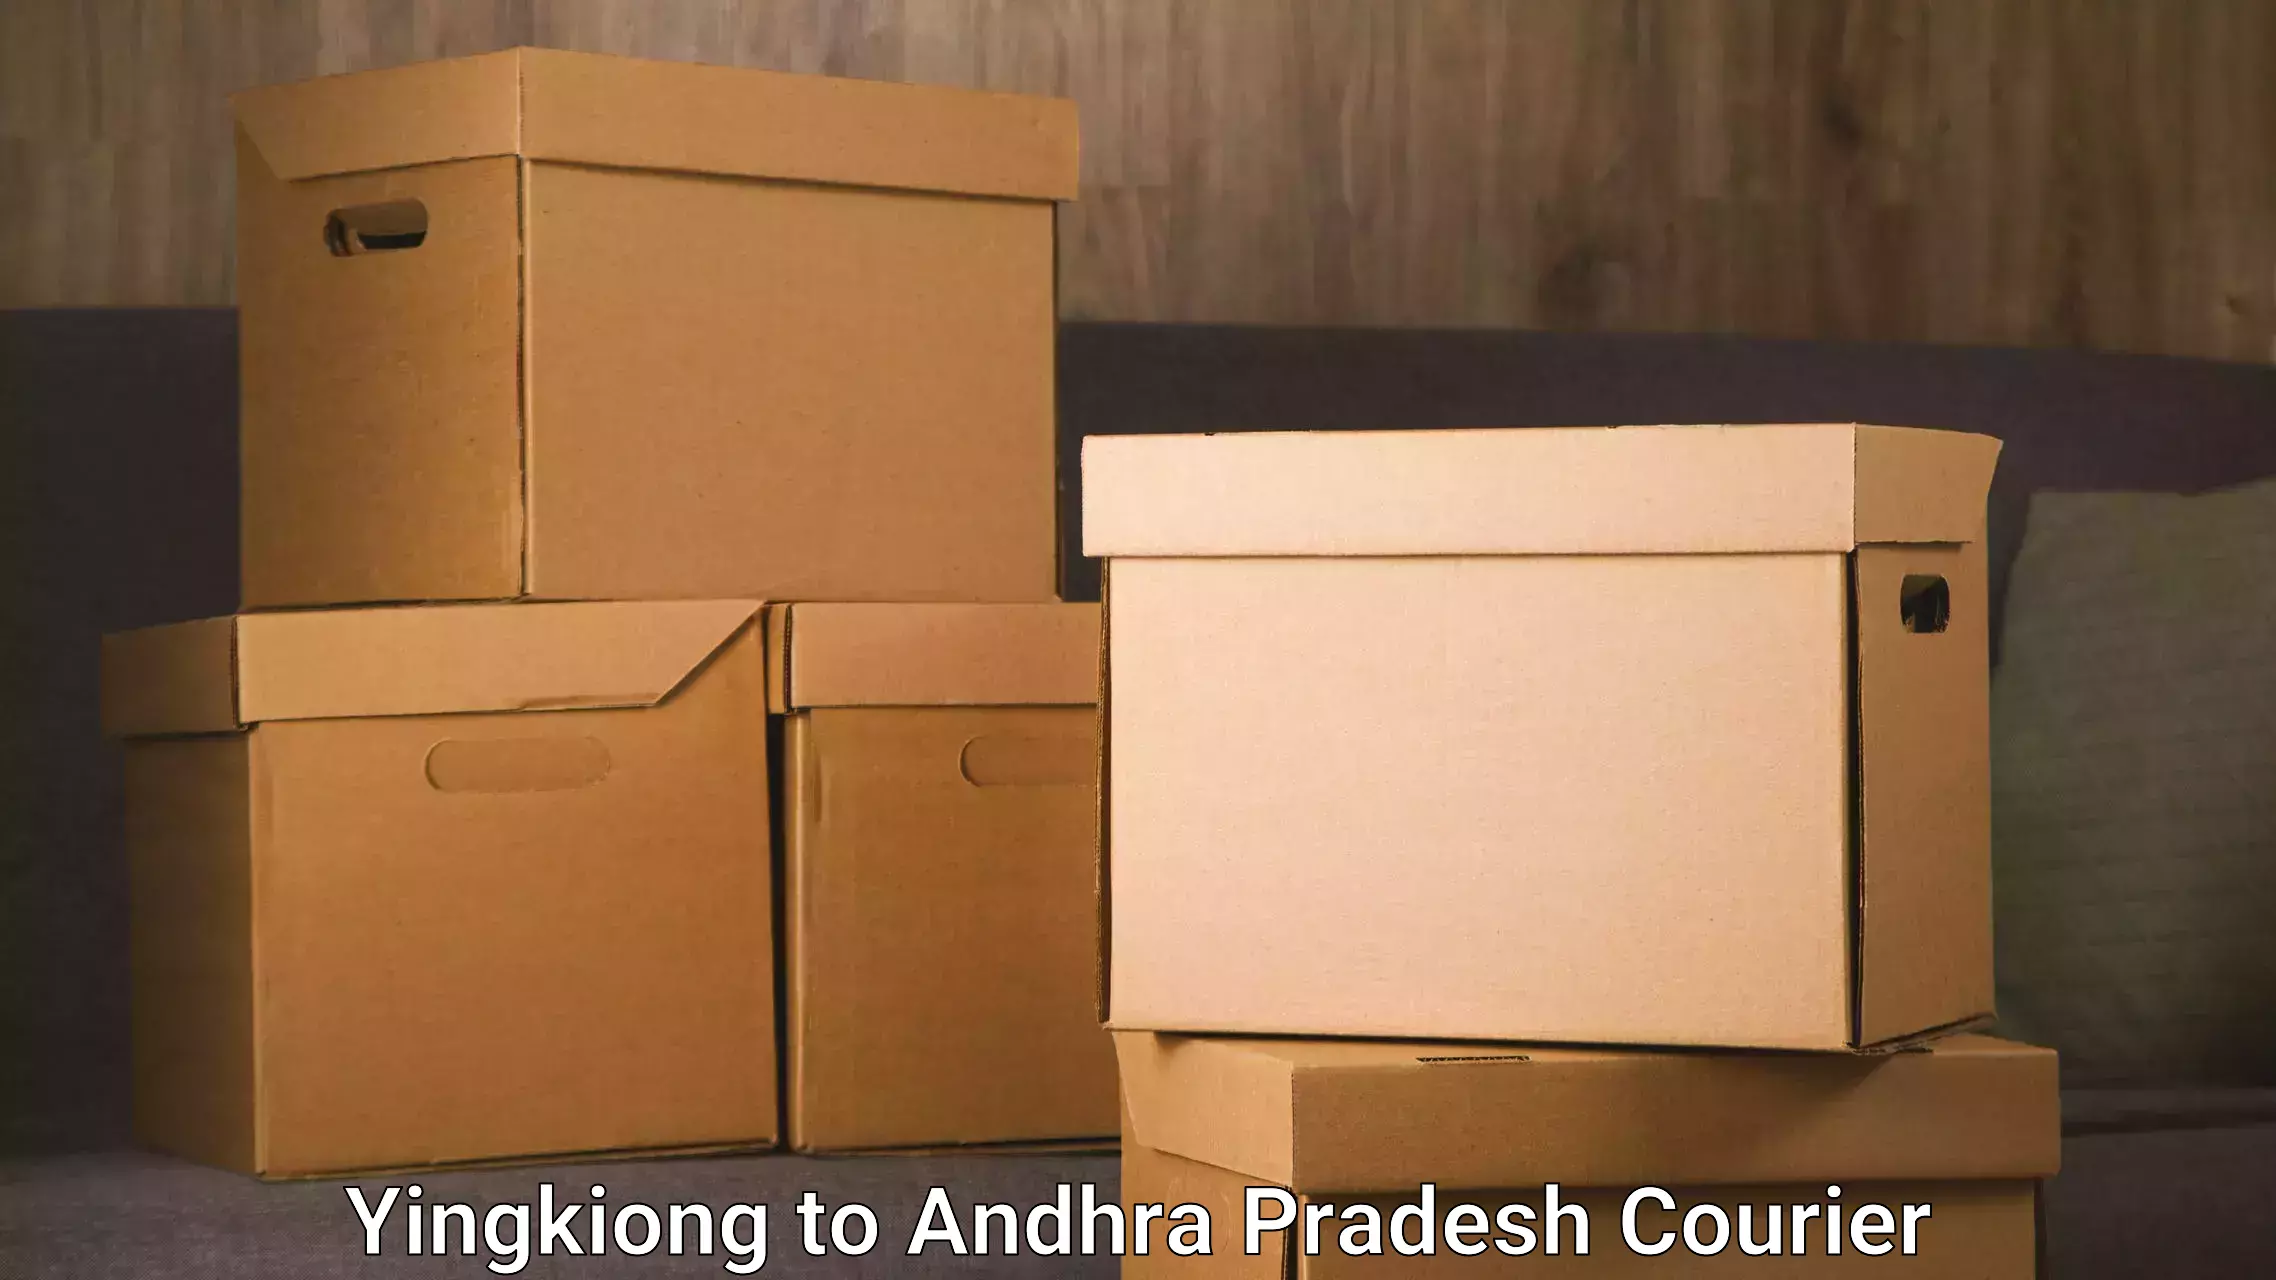 Next-day freight services Yingkiong to Tripuranthakam